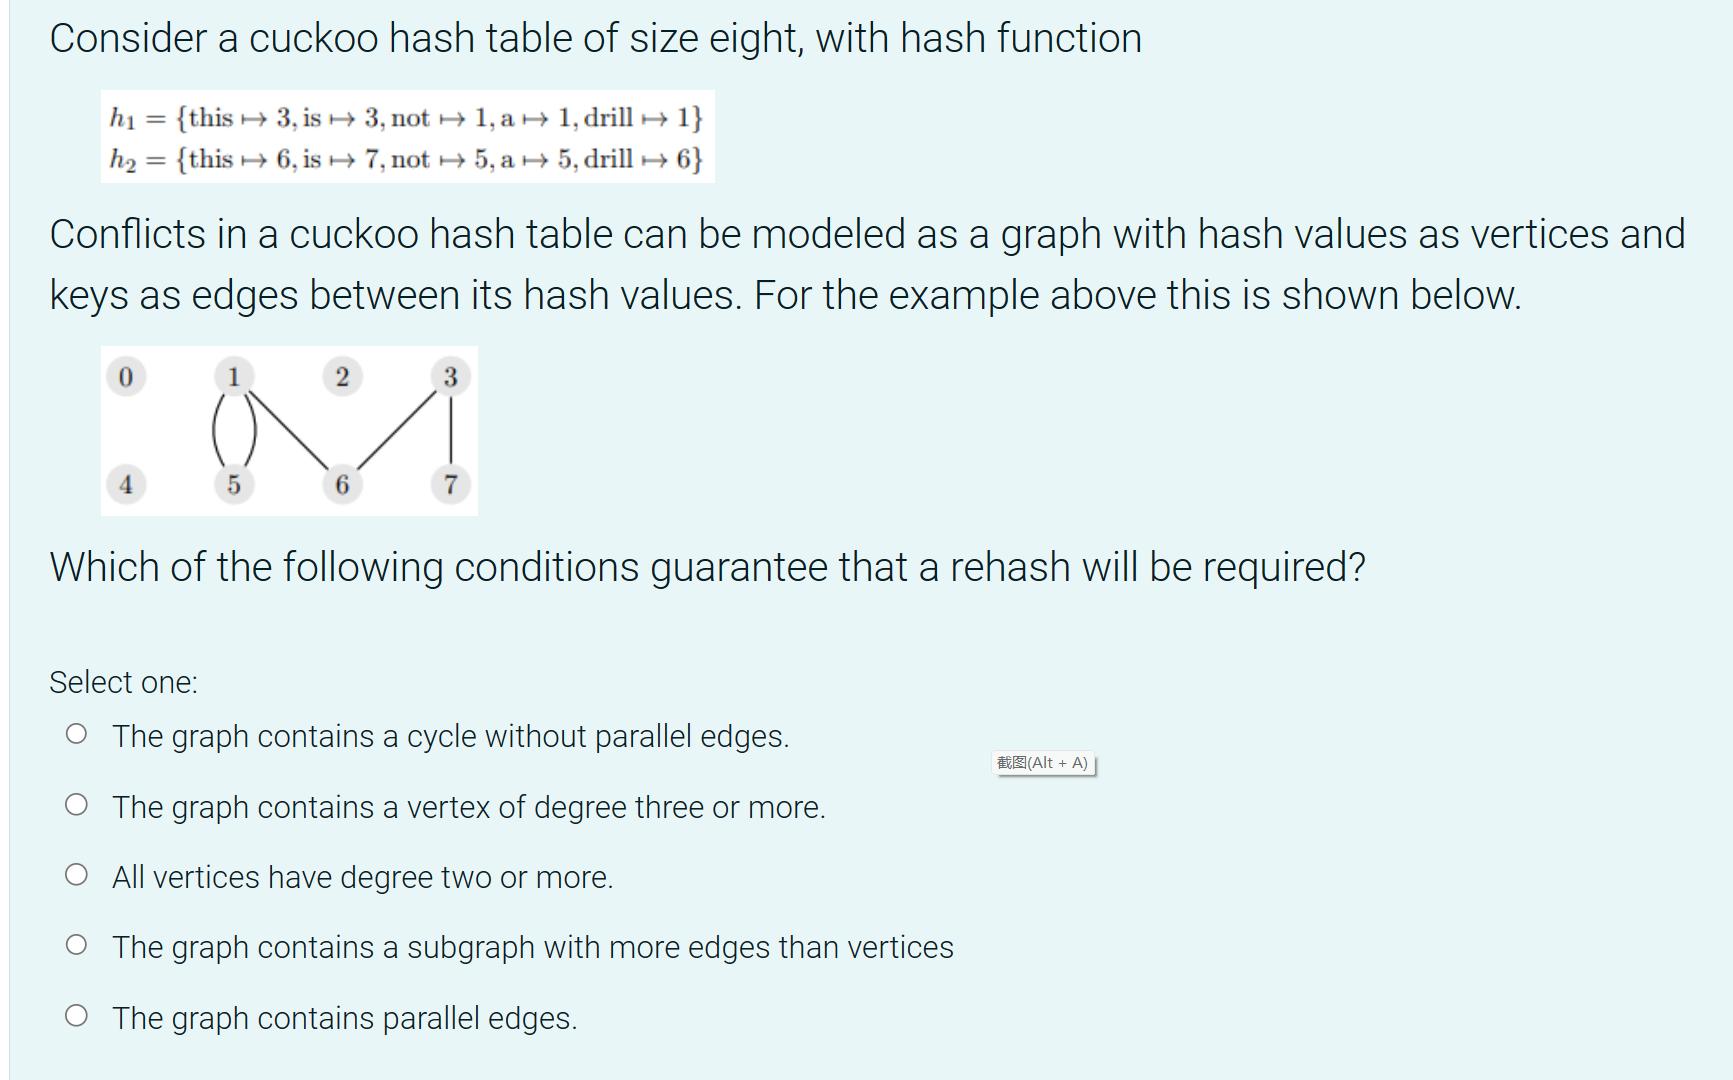 Consider a cuckoo hash table of size eight, with hash function h {this = 3, is  3, not  1, a  1, drill  1}